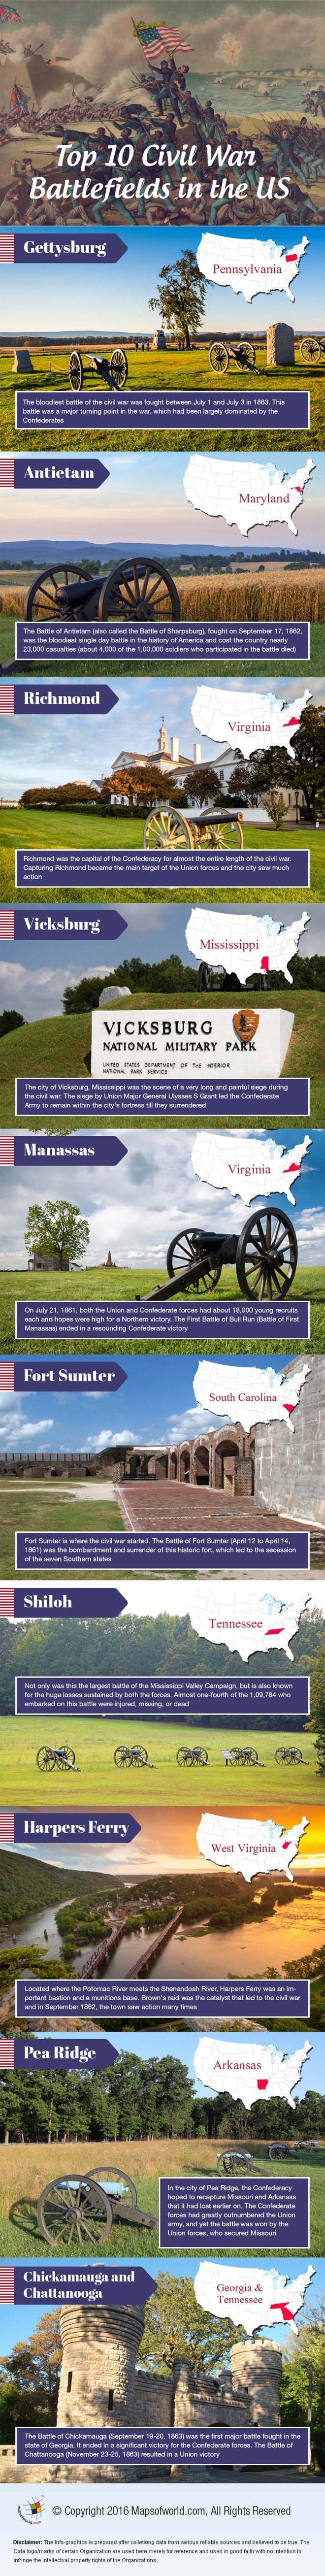 Infographic on Top 10 Civil War Battlefields in the US